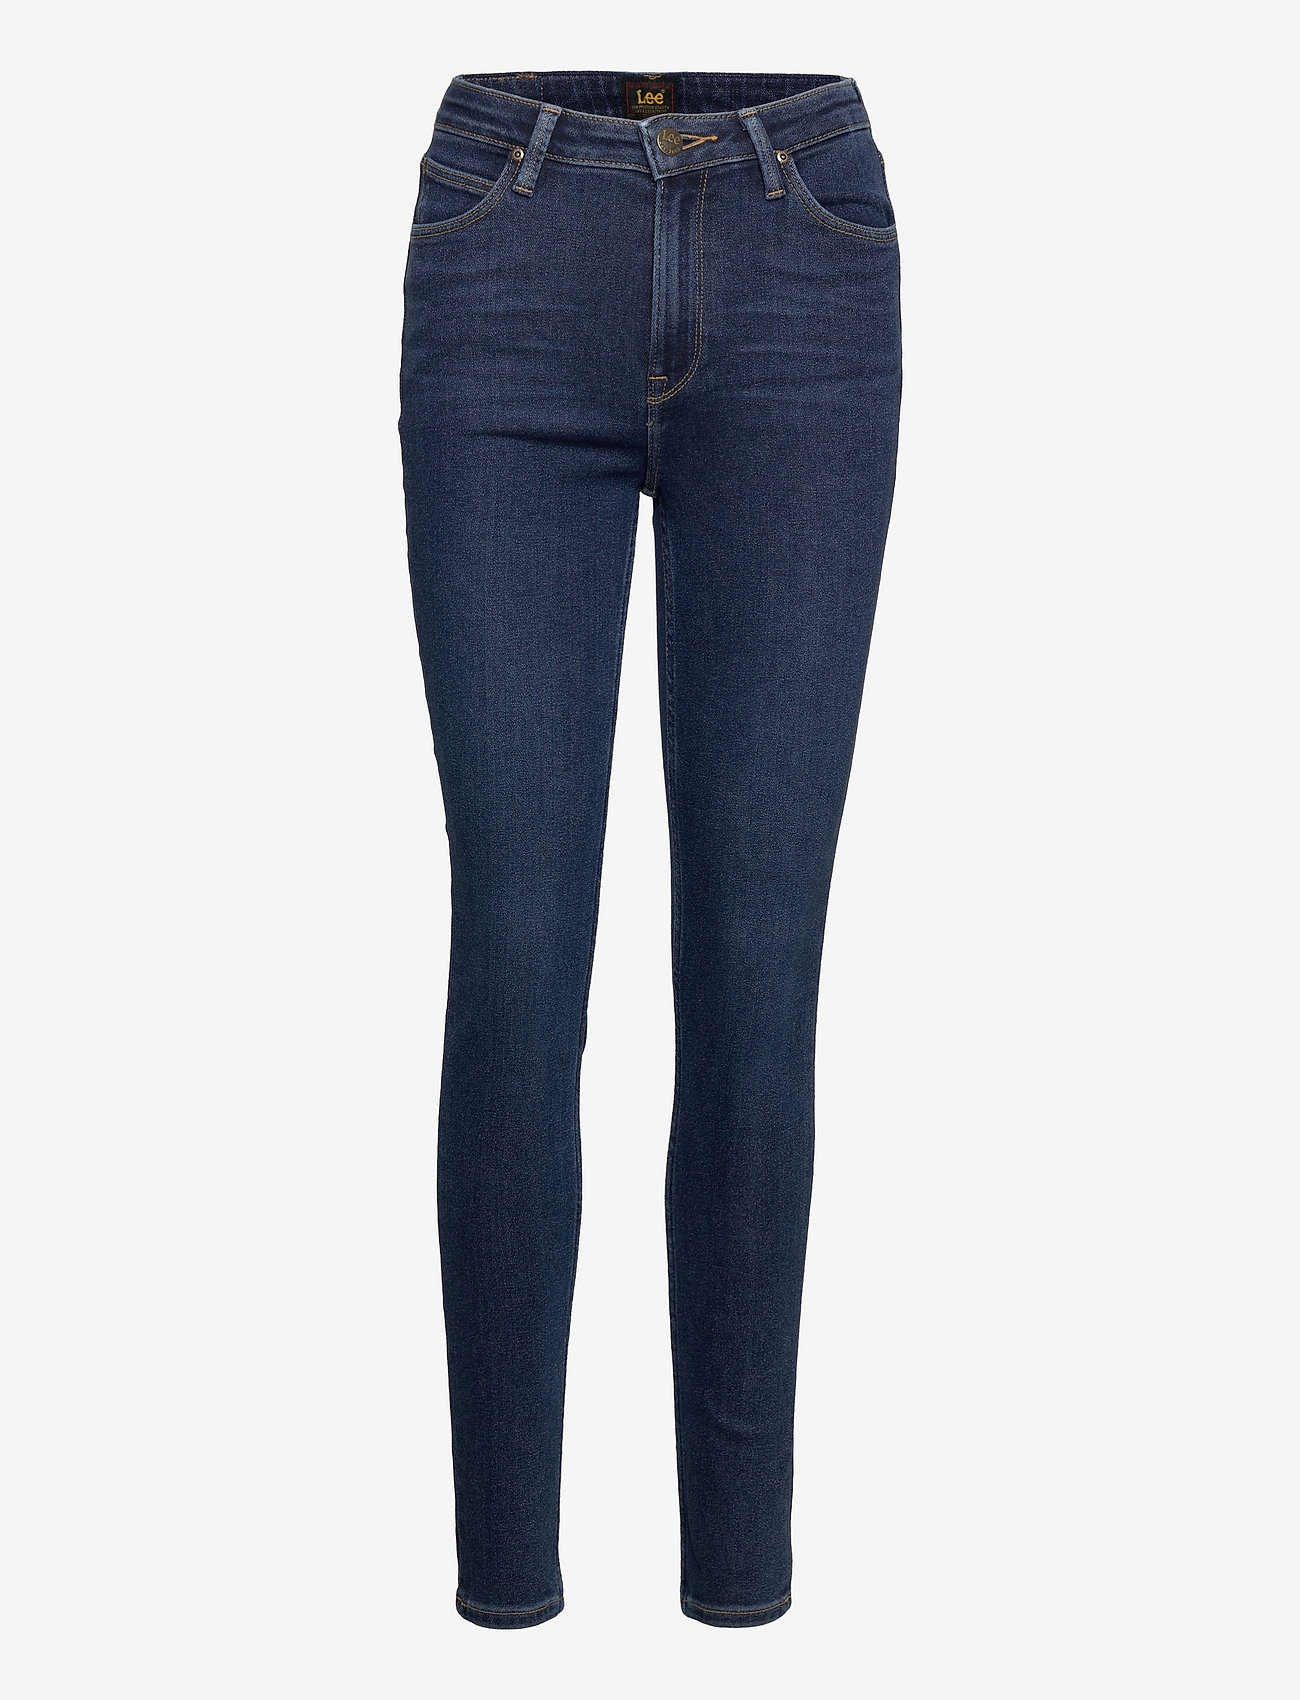 Lee Jeans - IVY - skinny jeans - worn willow - 0